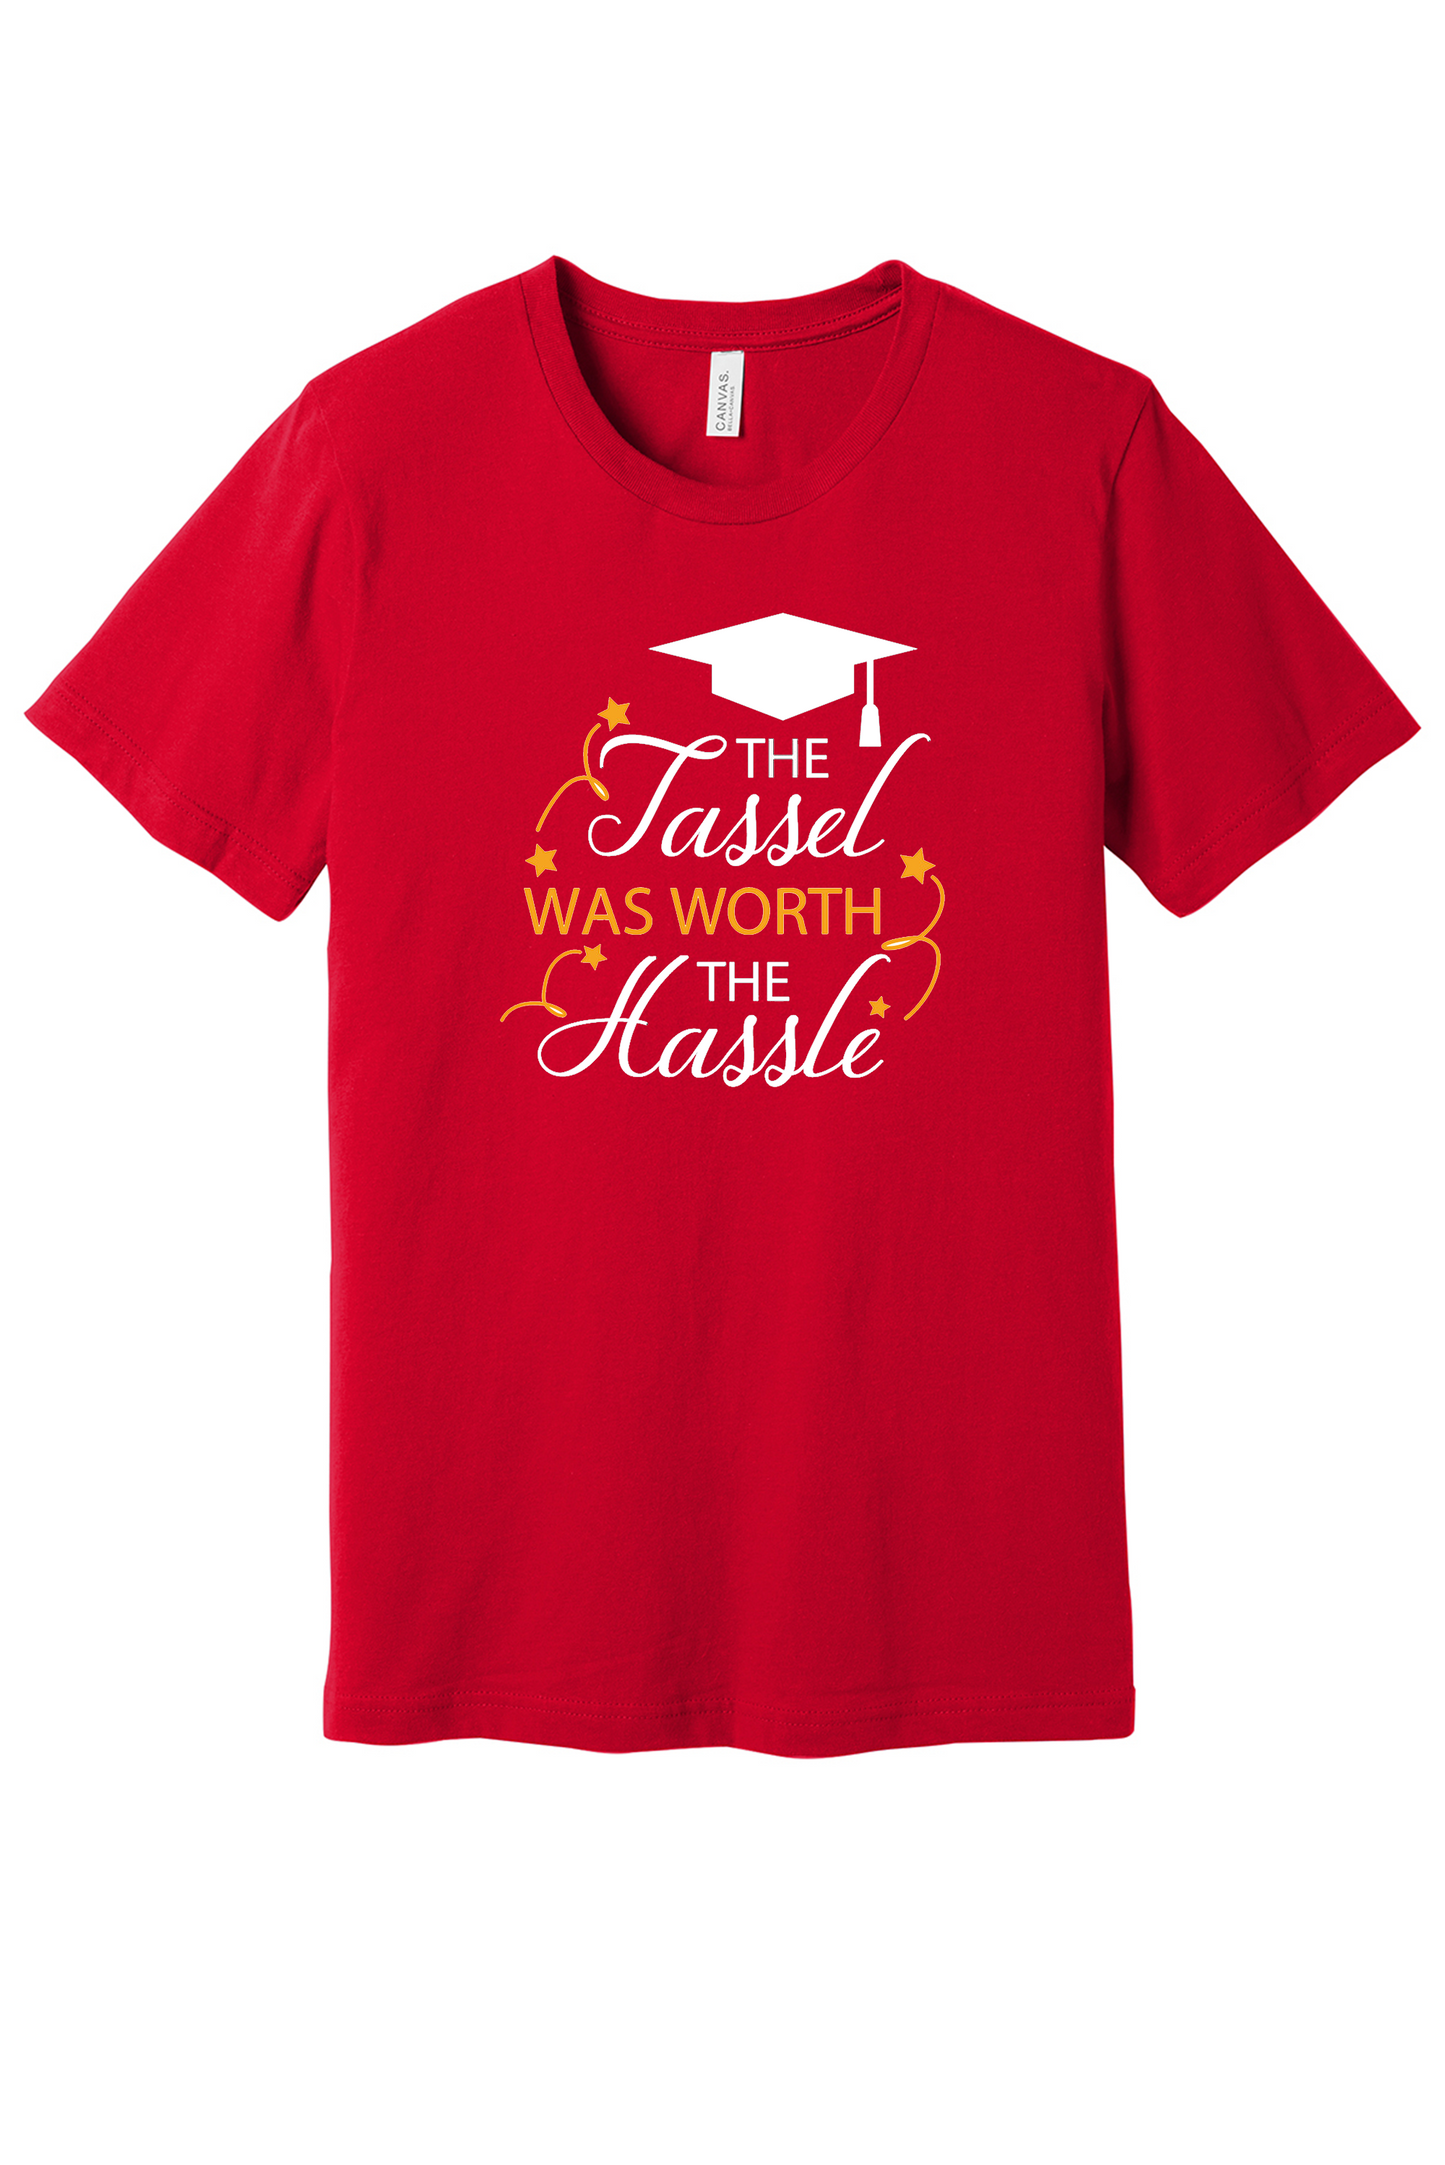 Graduation Day College High School Graphic Tees